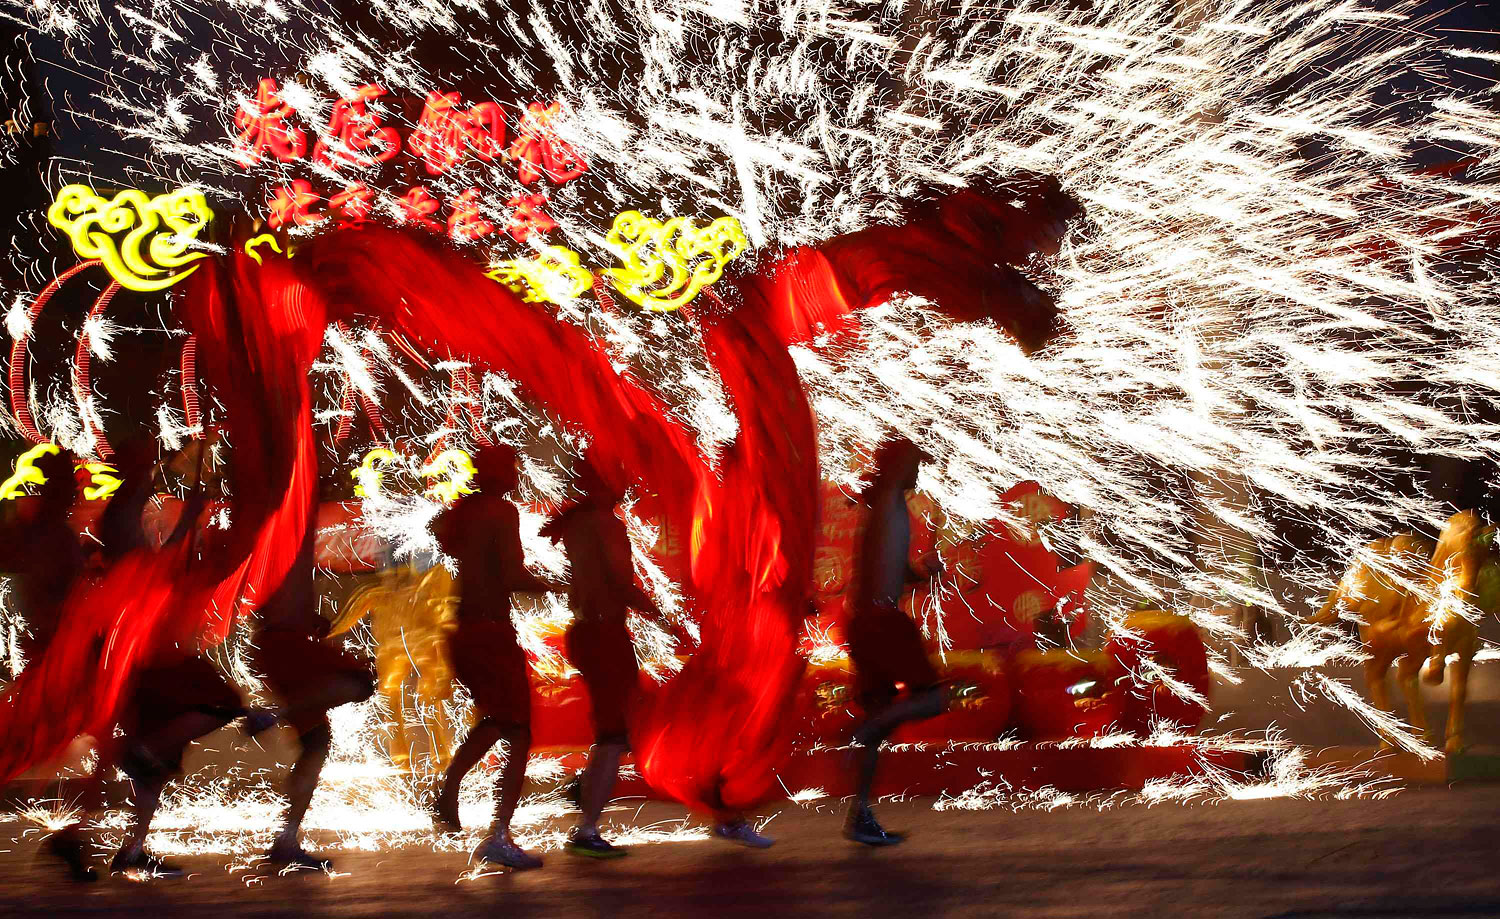 Dancers perform a fire dragon dance in the shower of molten iron spewing firework-like sparks during a folk art performance in Beijing